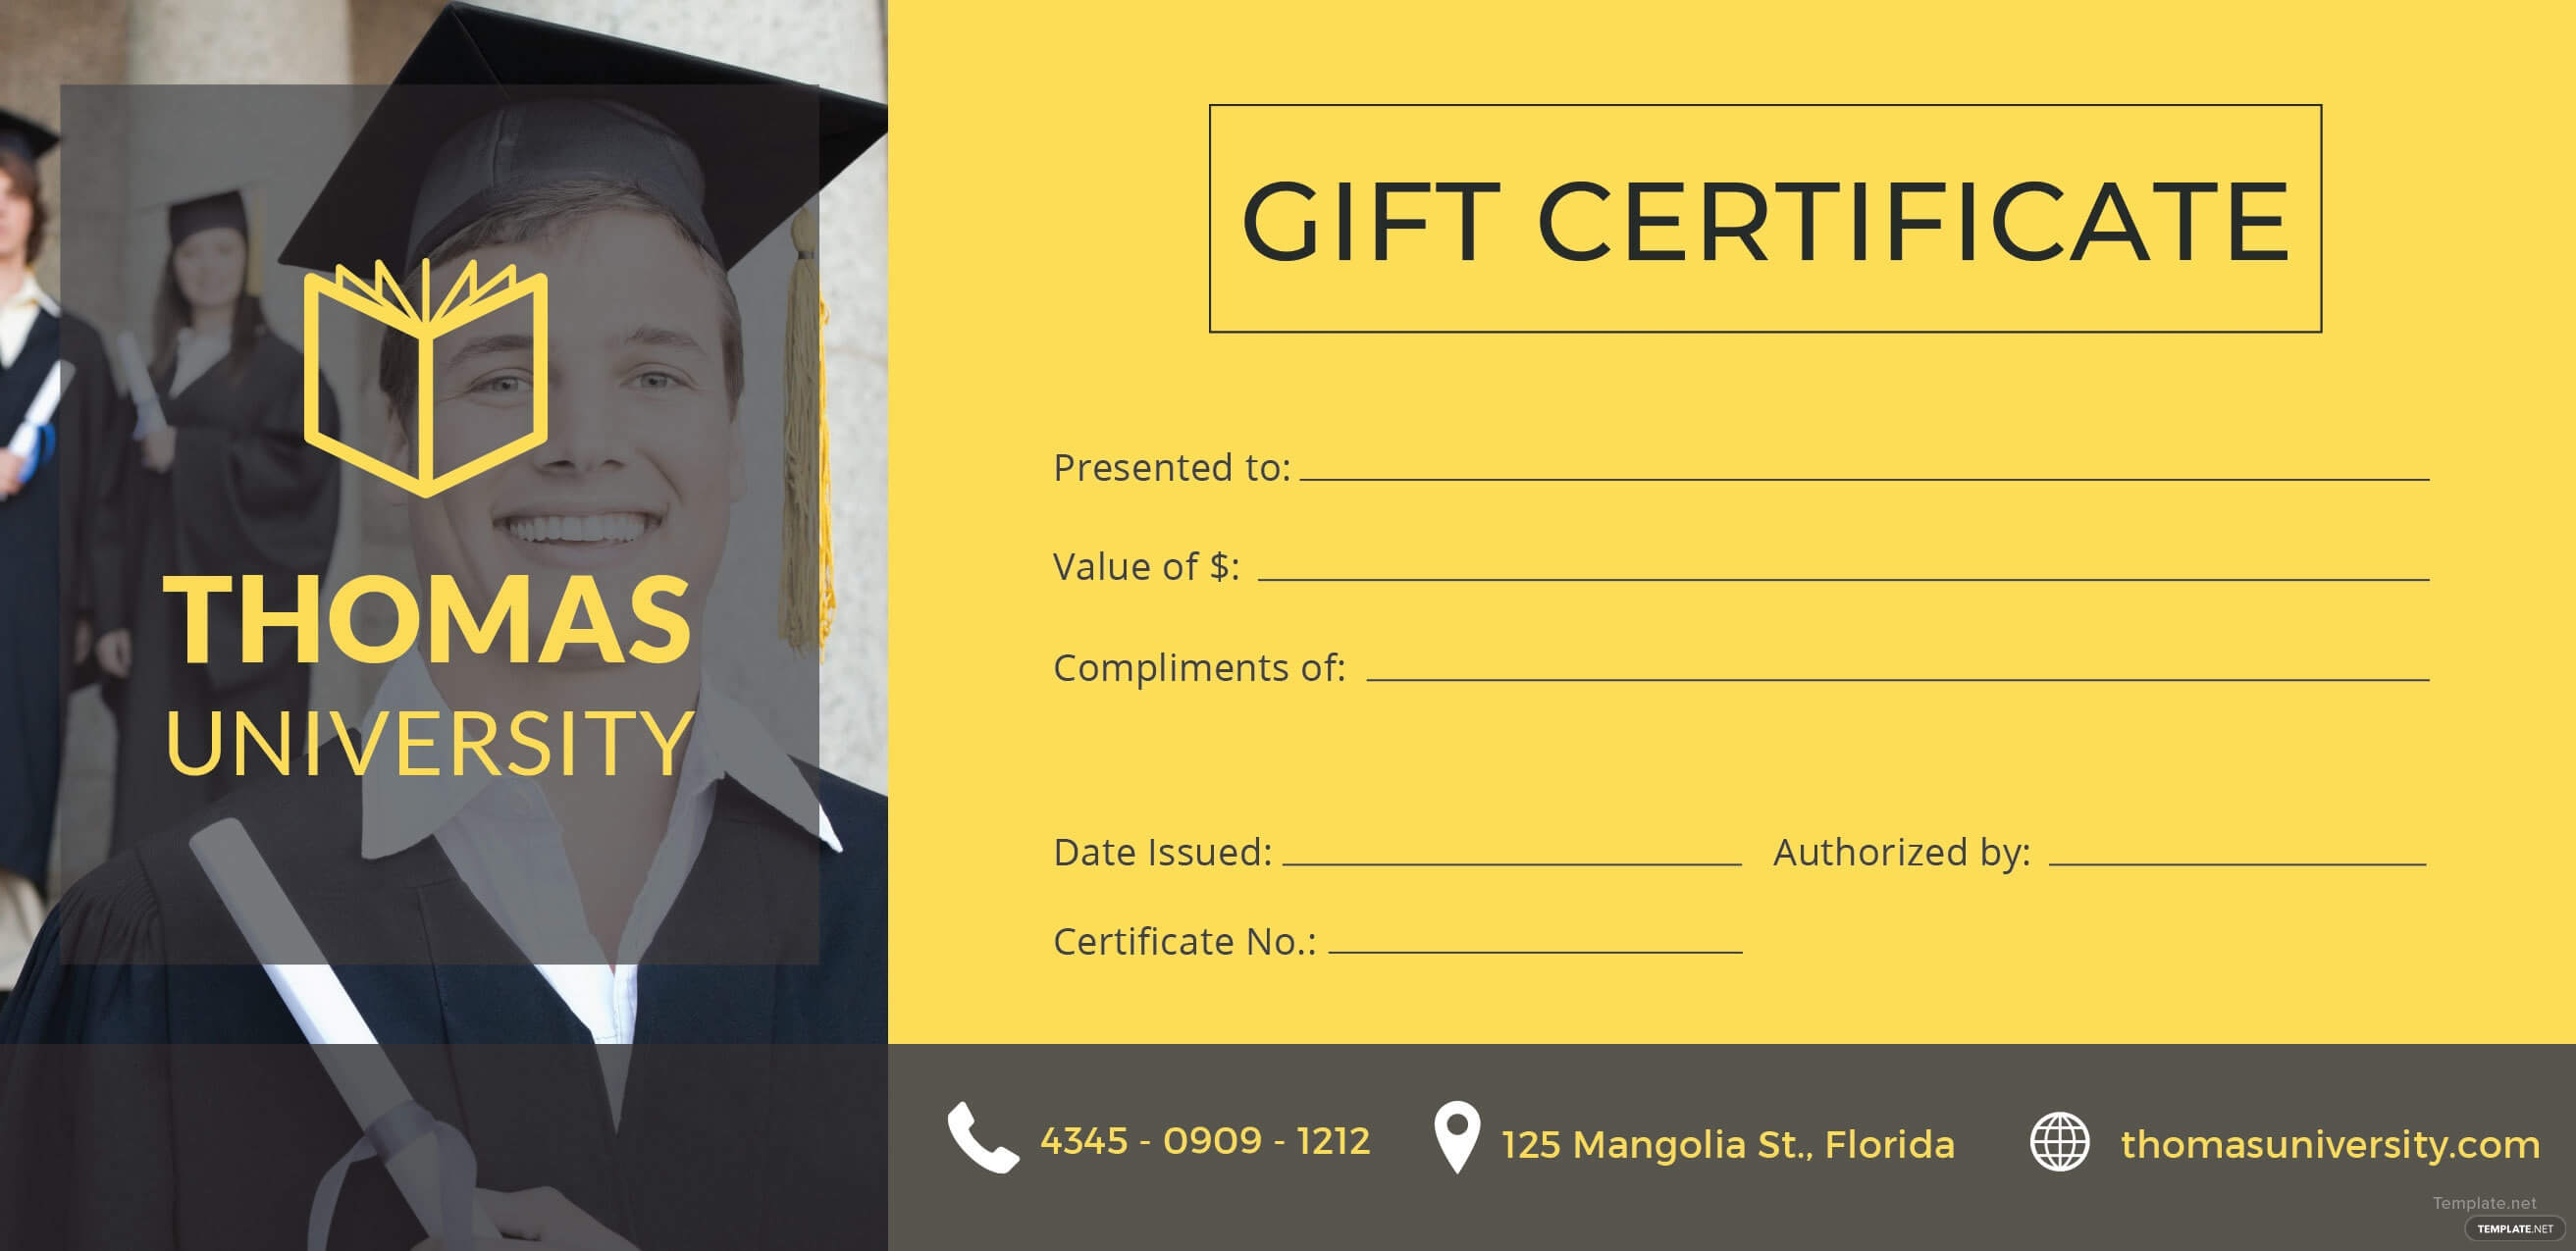 Certificate Templates: Free Graduation Gift Certificate Inside Graduation Gift Certificate Template Free